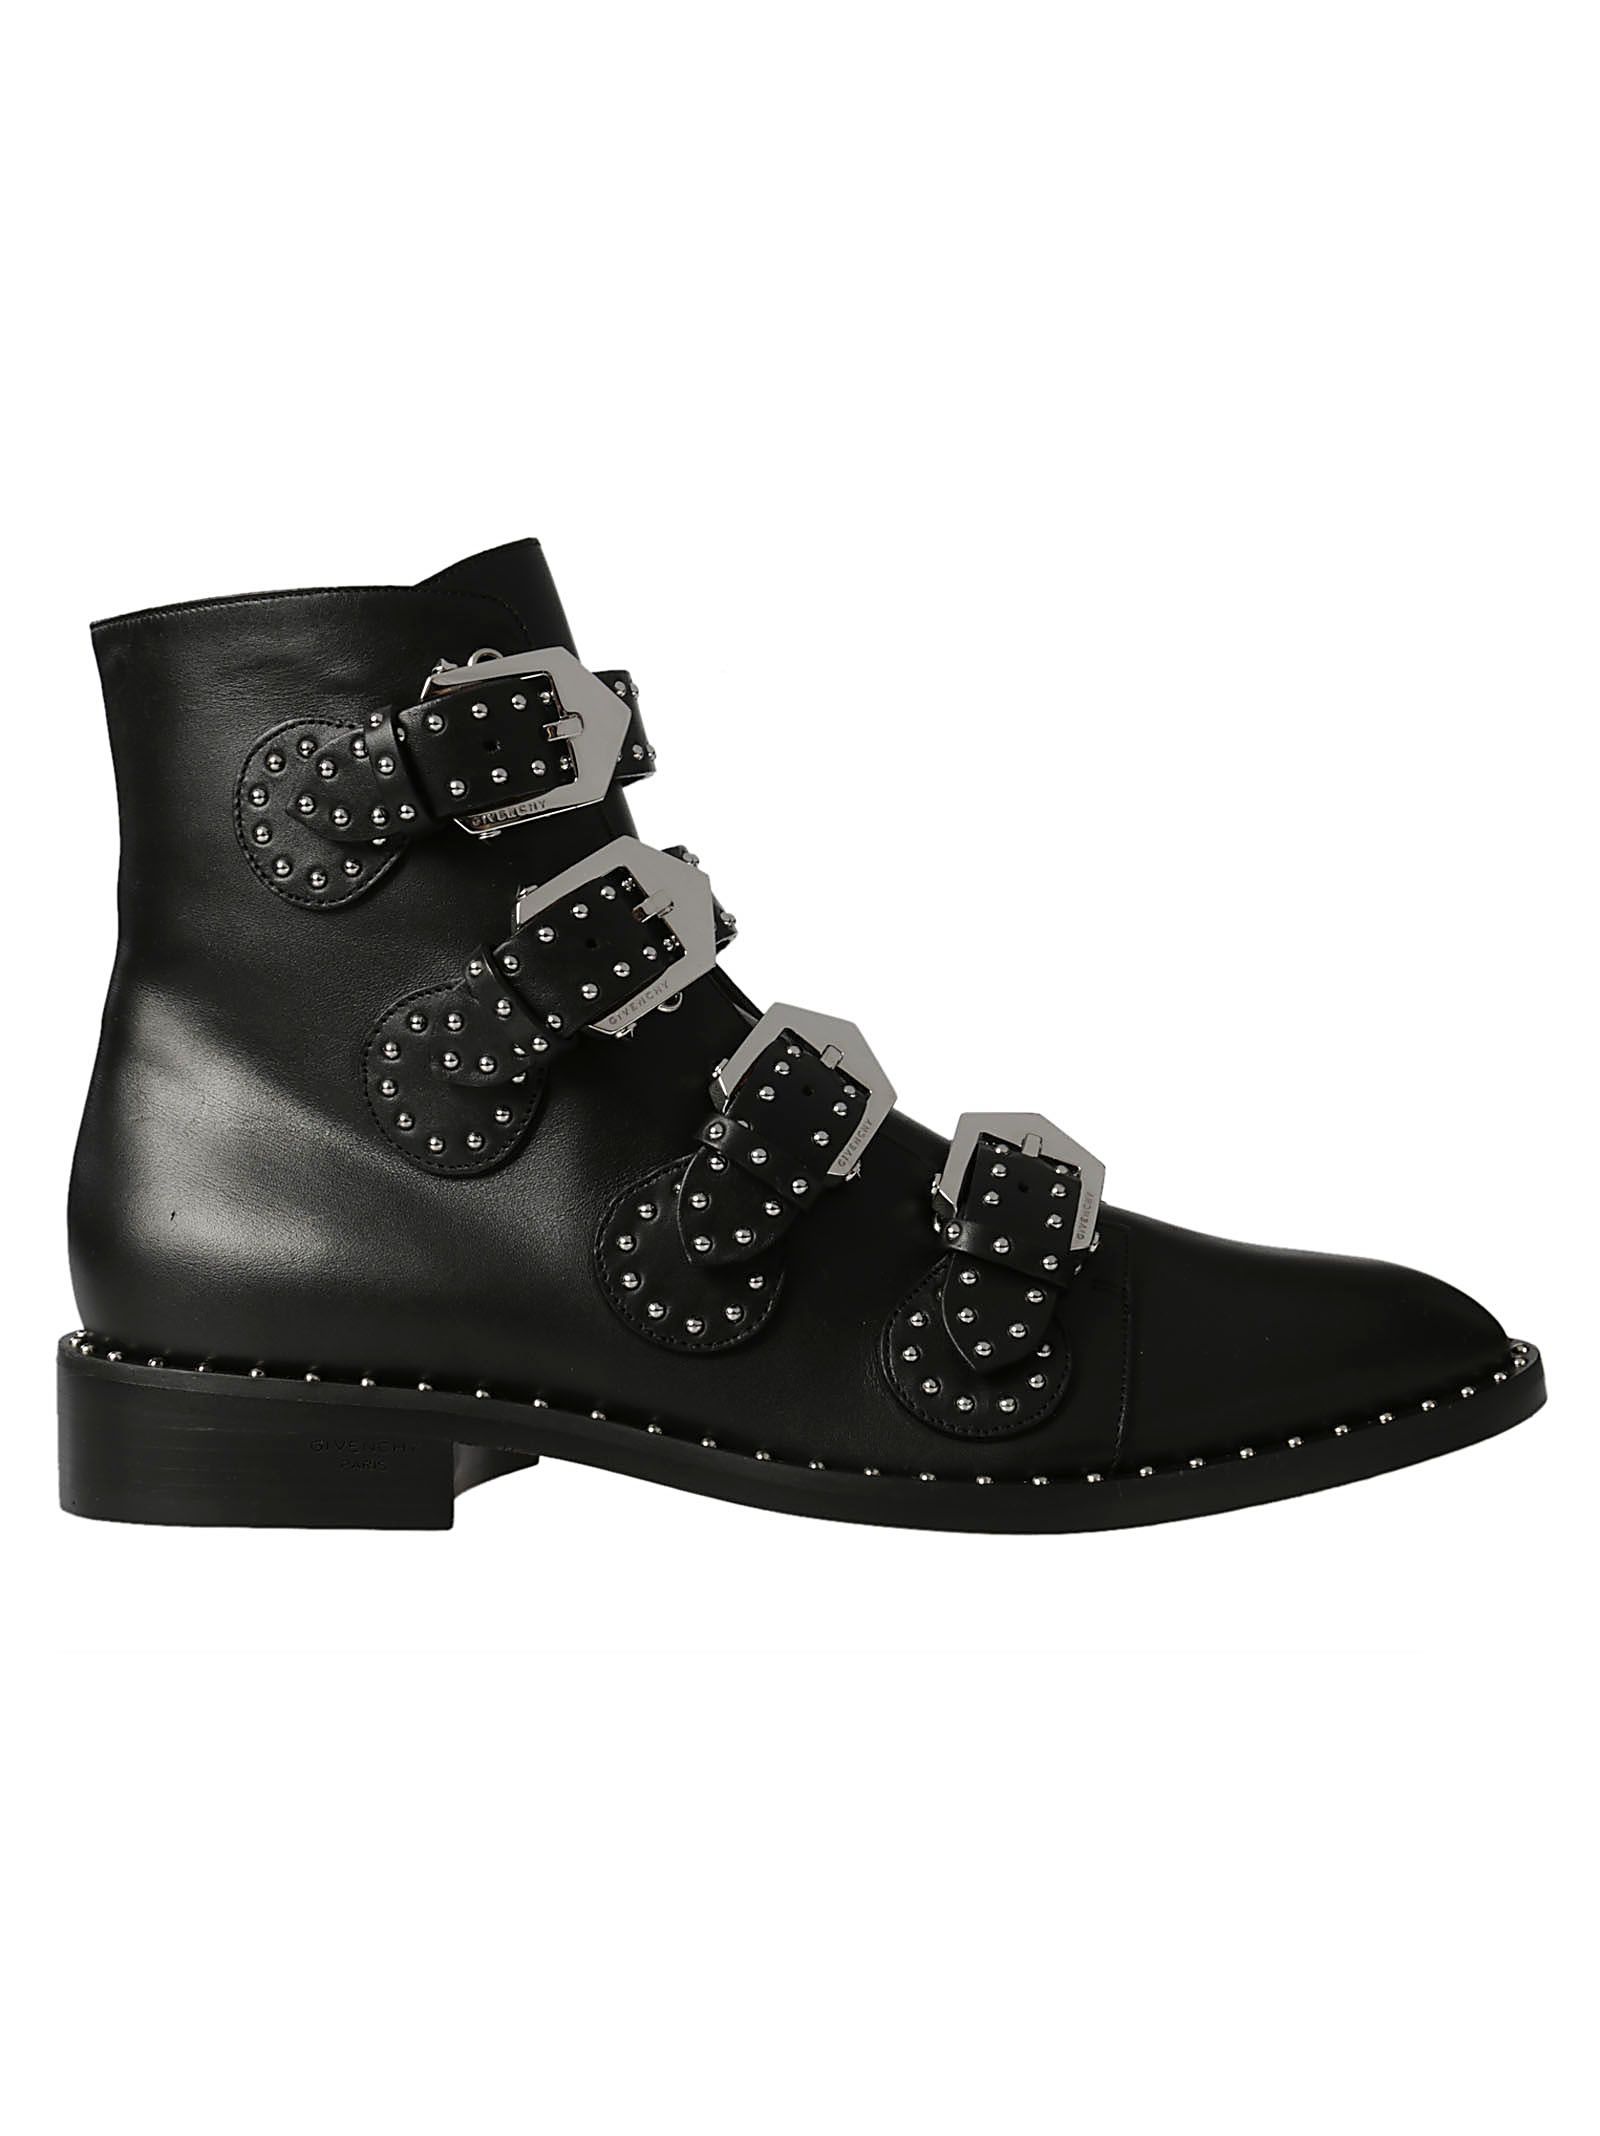 Givenchy - Givenchy Rivets Ankle Boots - Black, Women's Boots | Italist